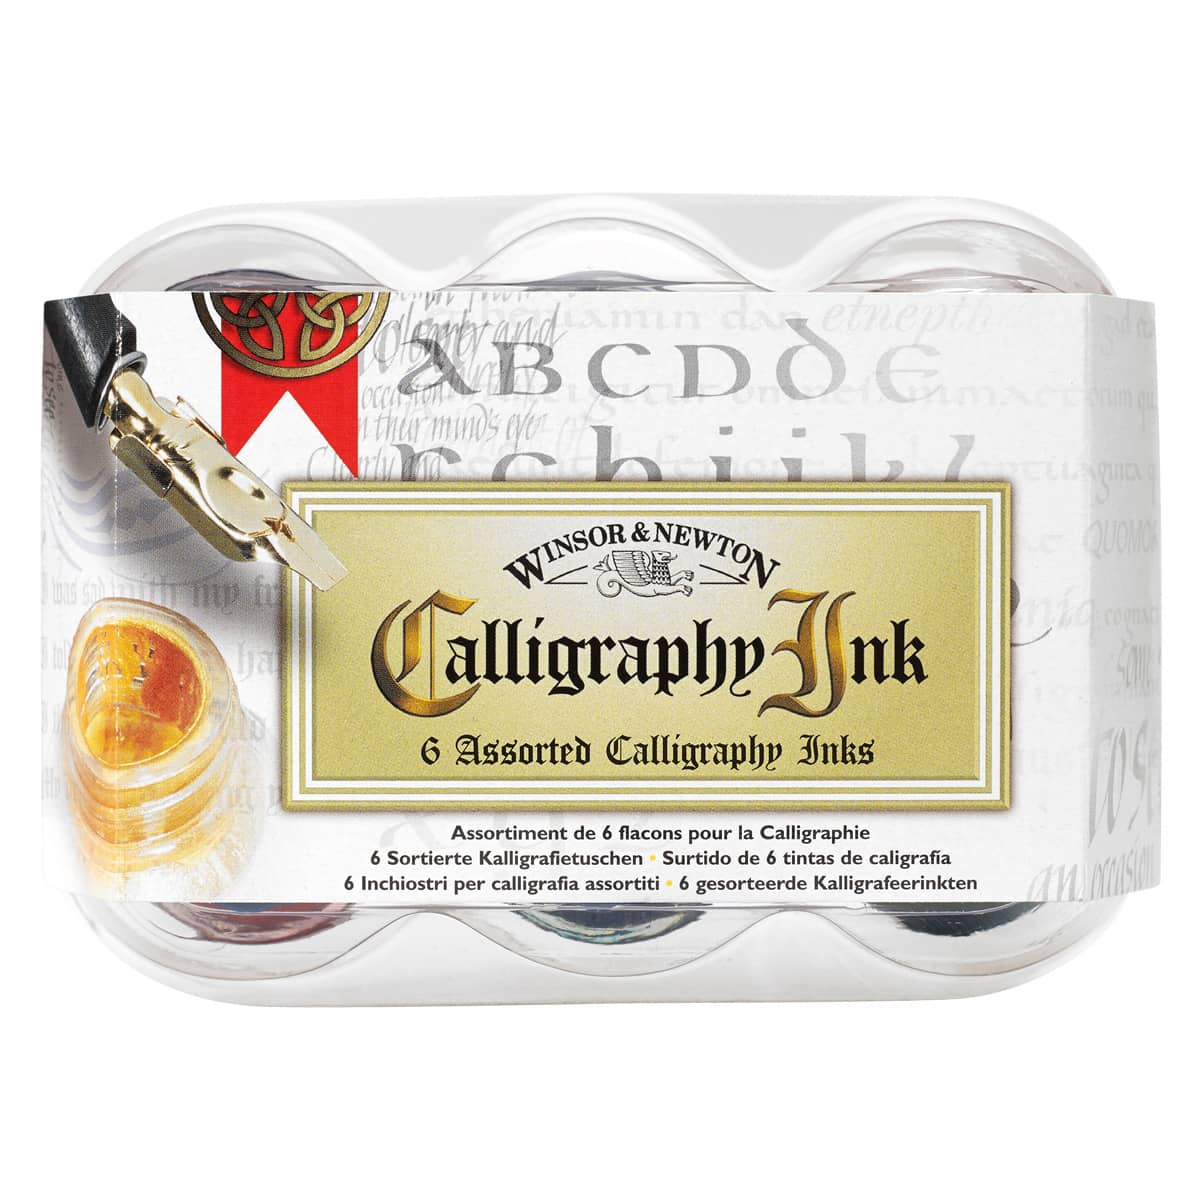 Winsor Newton Calligraphy Ink Set of 6 Colors